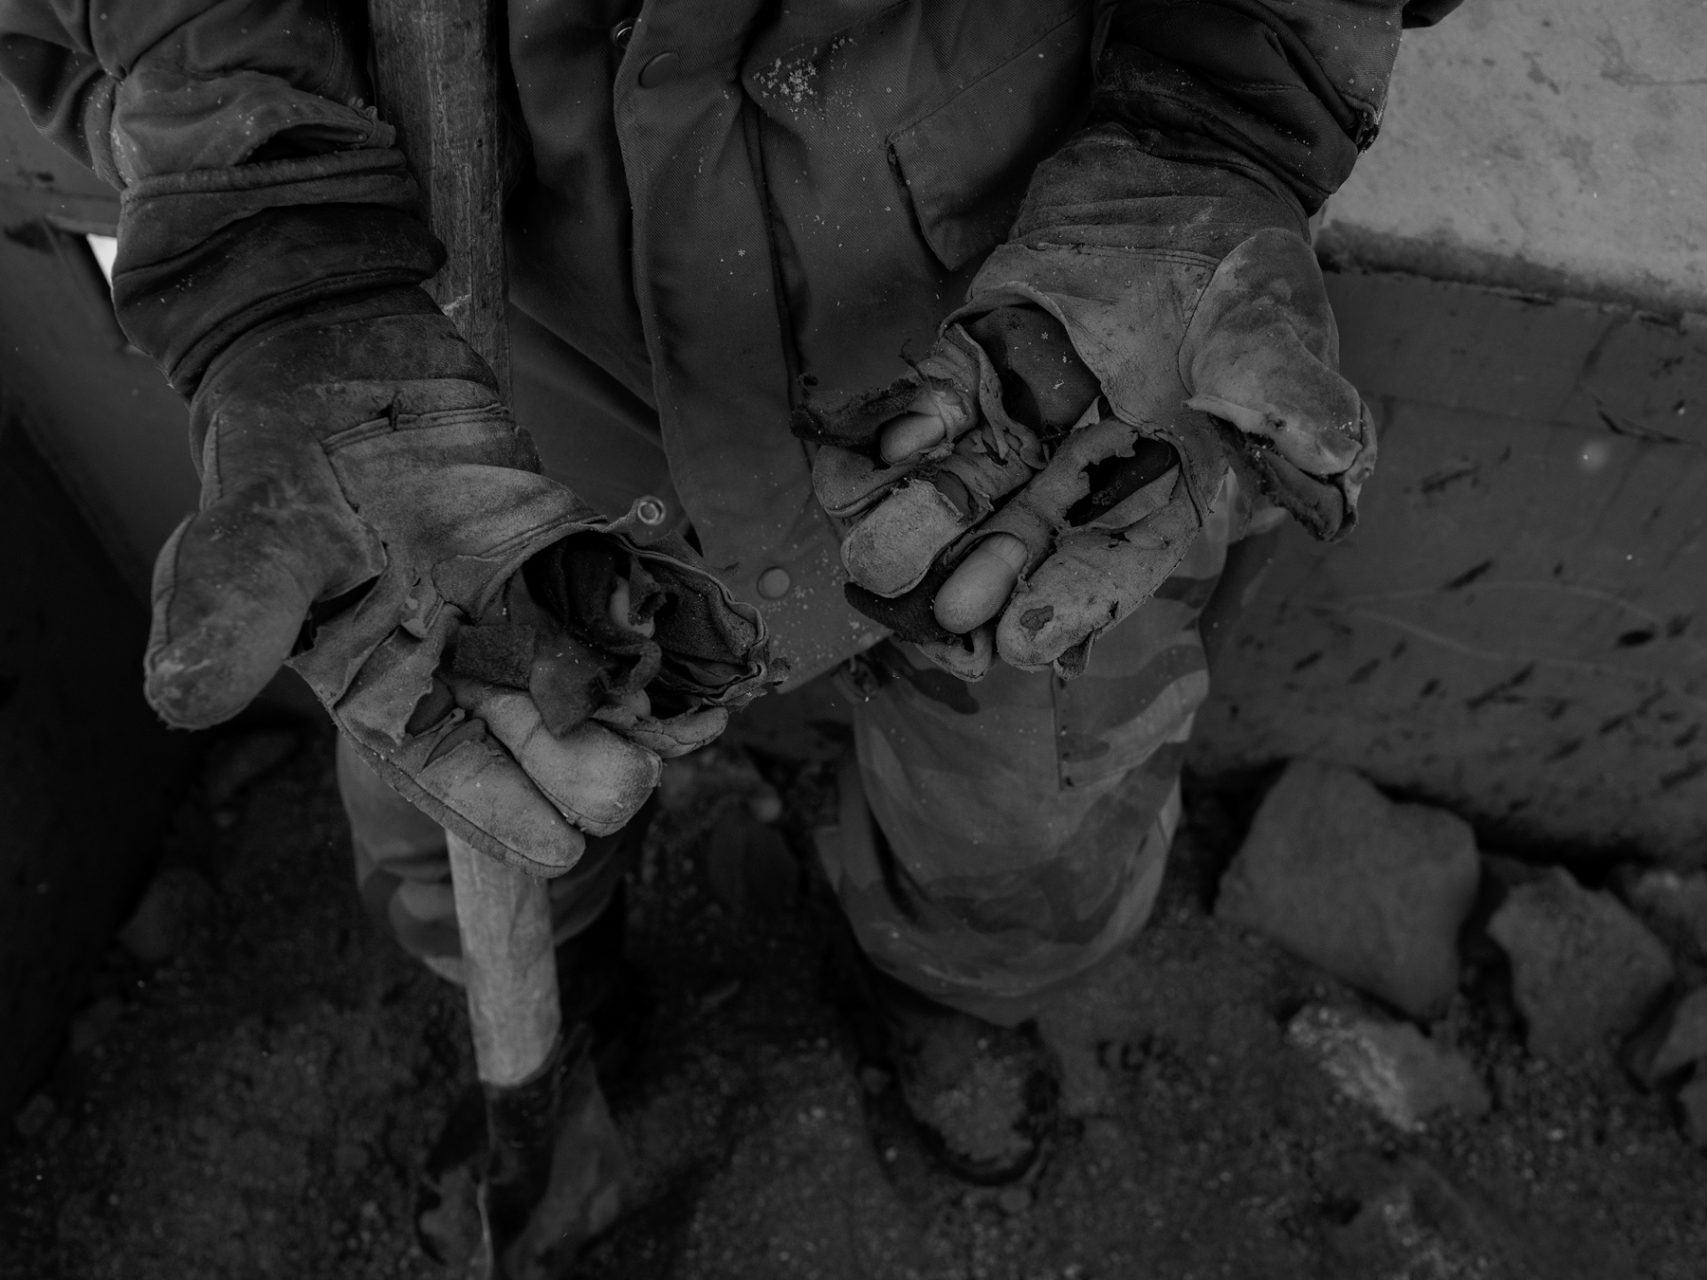 A service worker of the Salang tunnel shows his worn out working gloves prior to start sprinkling sand on the iced surface of the road.